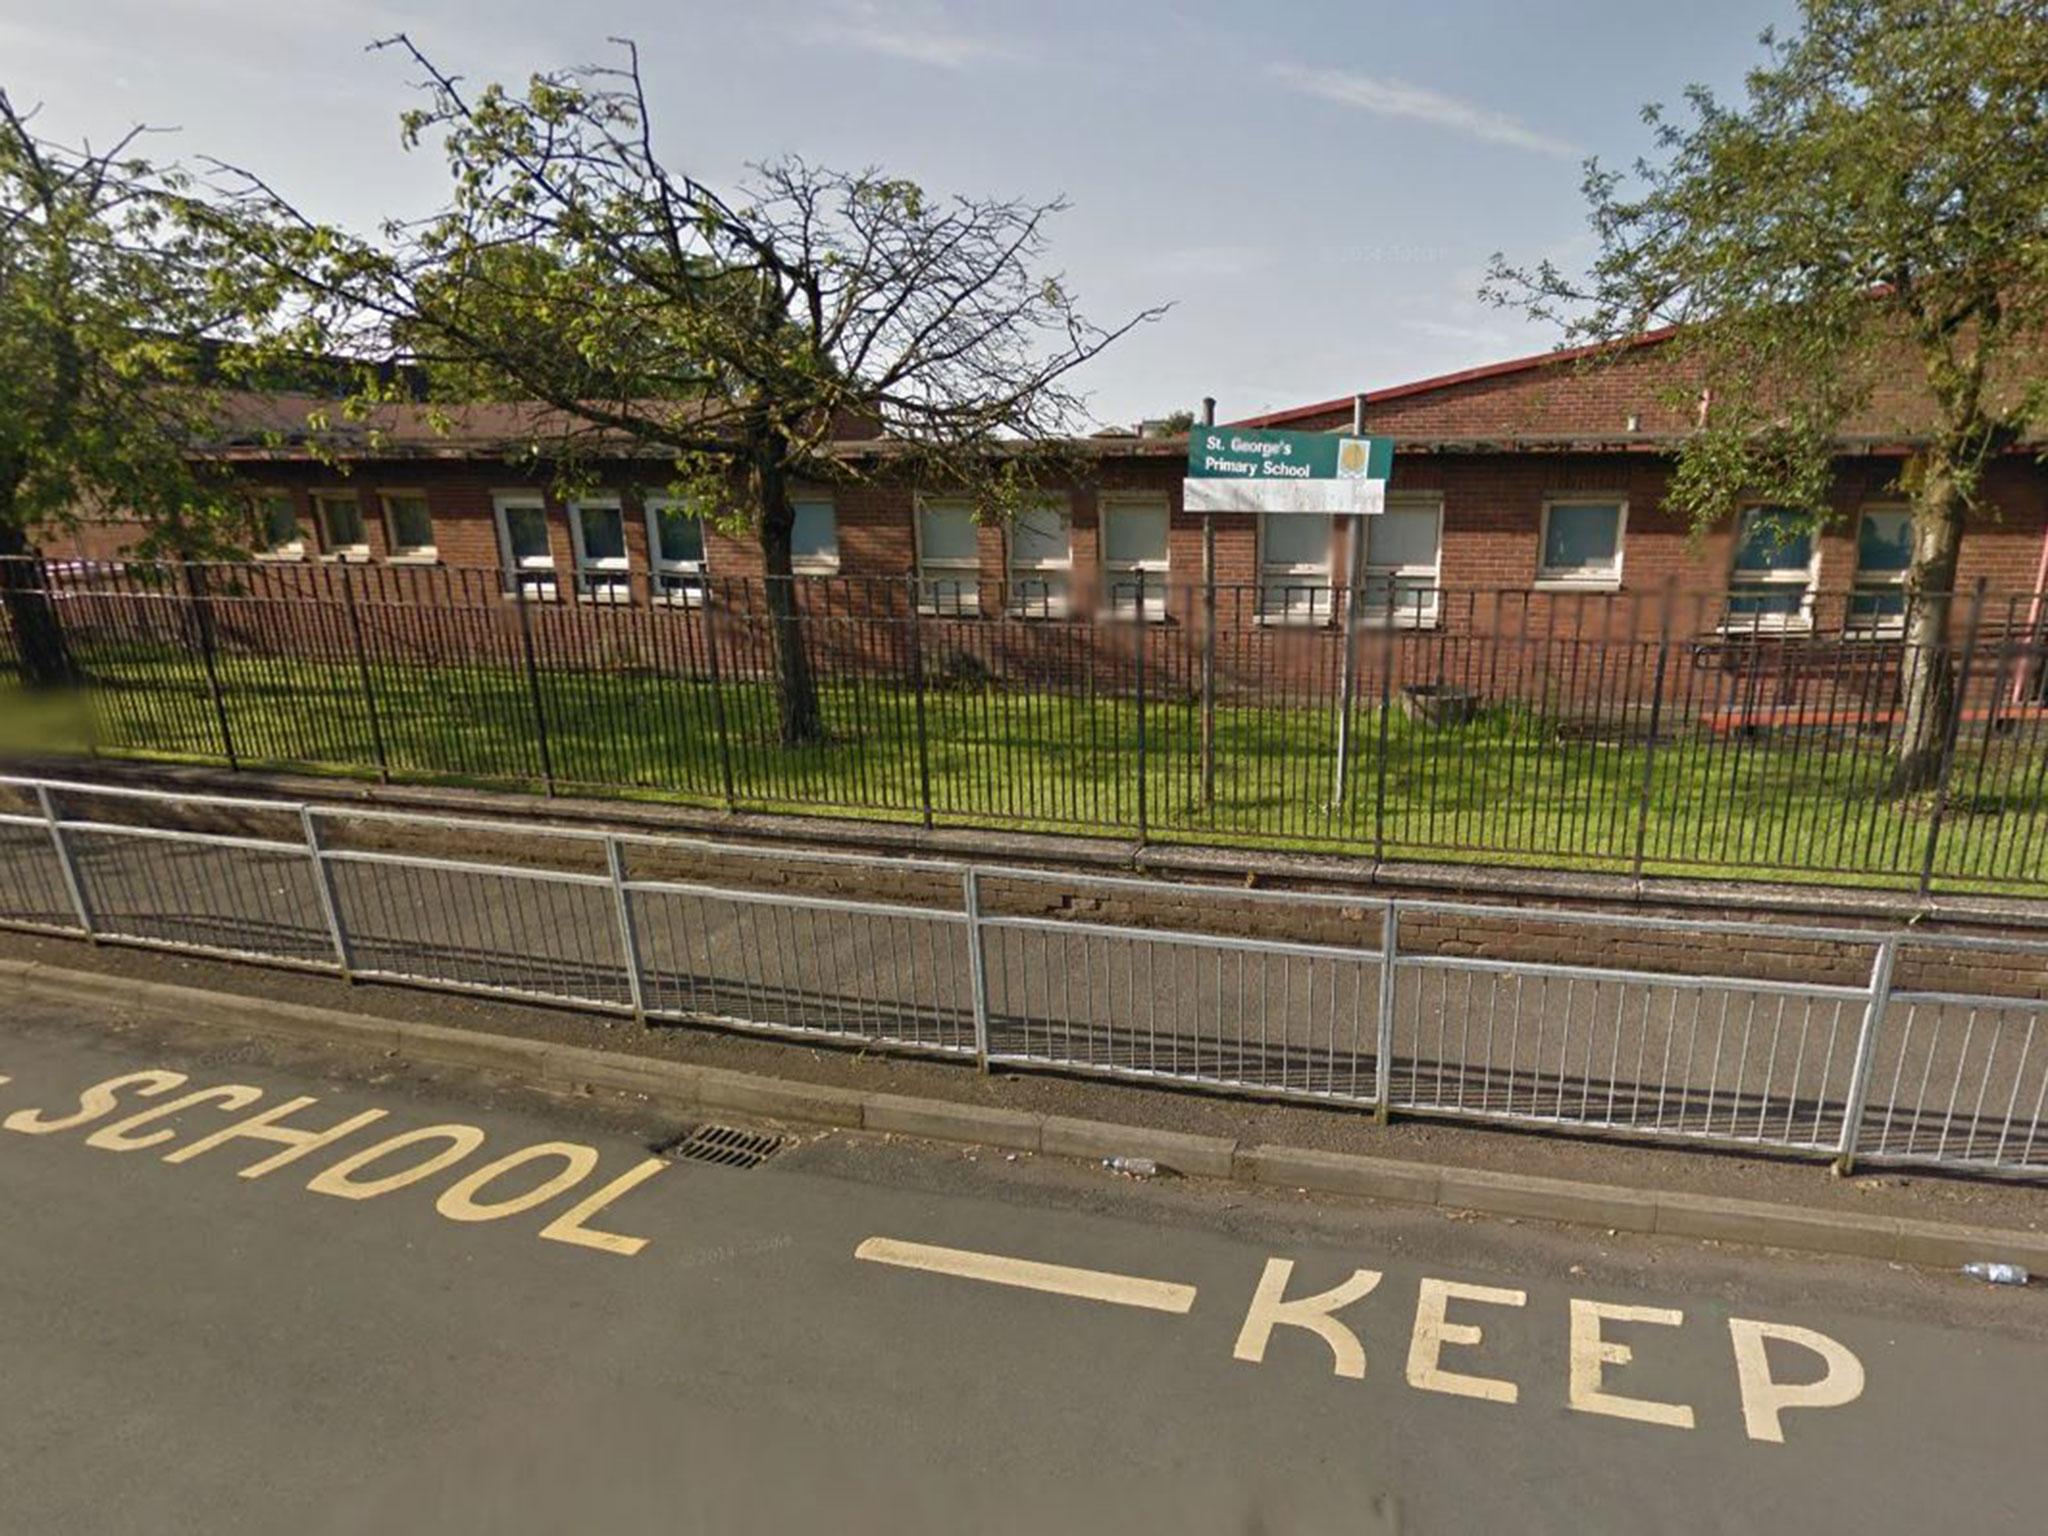 Glasgow primary school shooting: Man is being treating in hospital after targeted attack, Police Scotland confirms